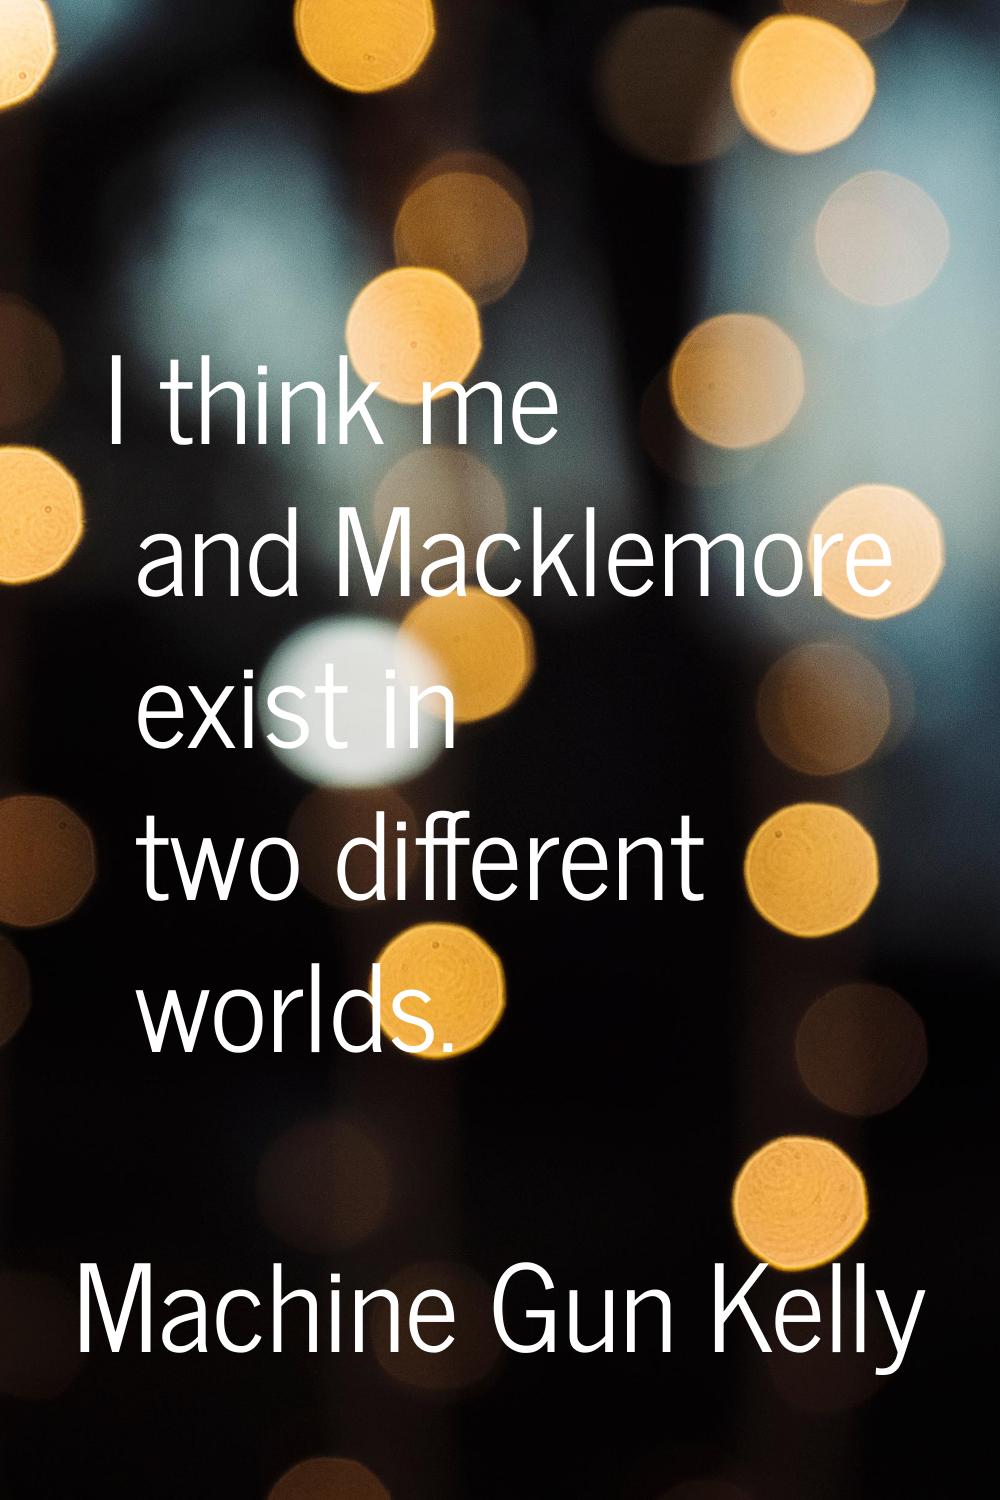 I think me and Macklemore exist in two different worlds.